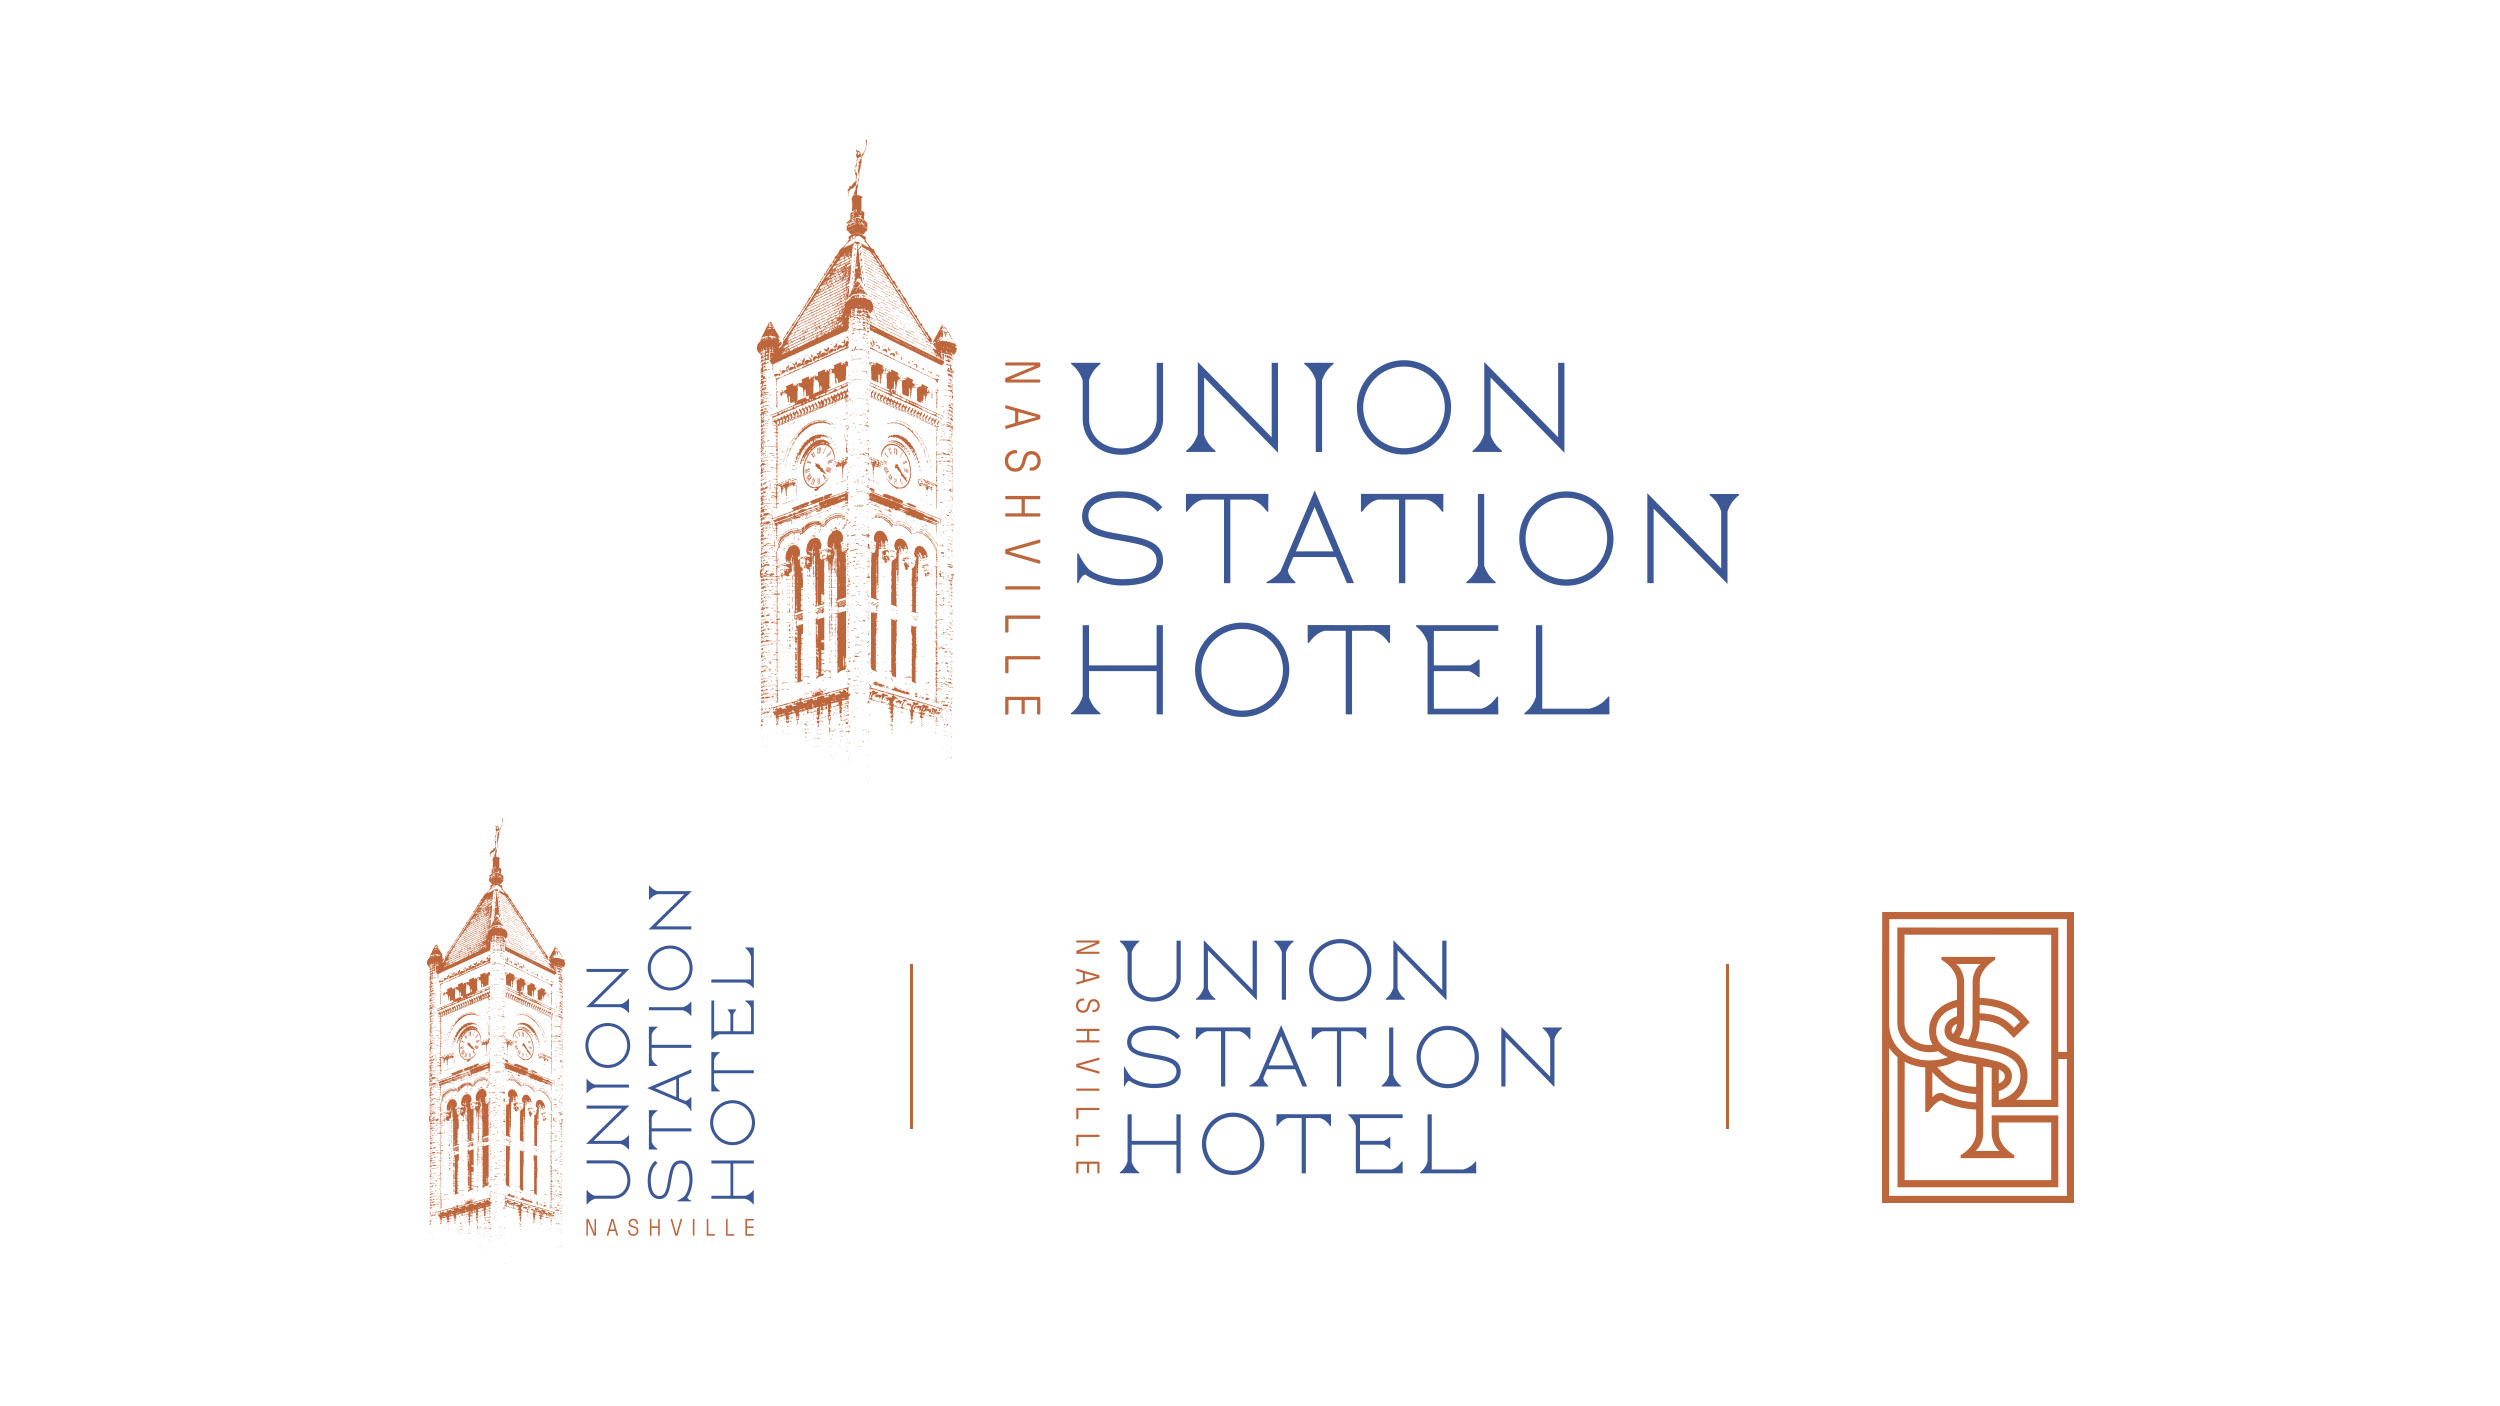 Main logo and logo alternatives including the monogram for the Union Station Hotel